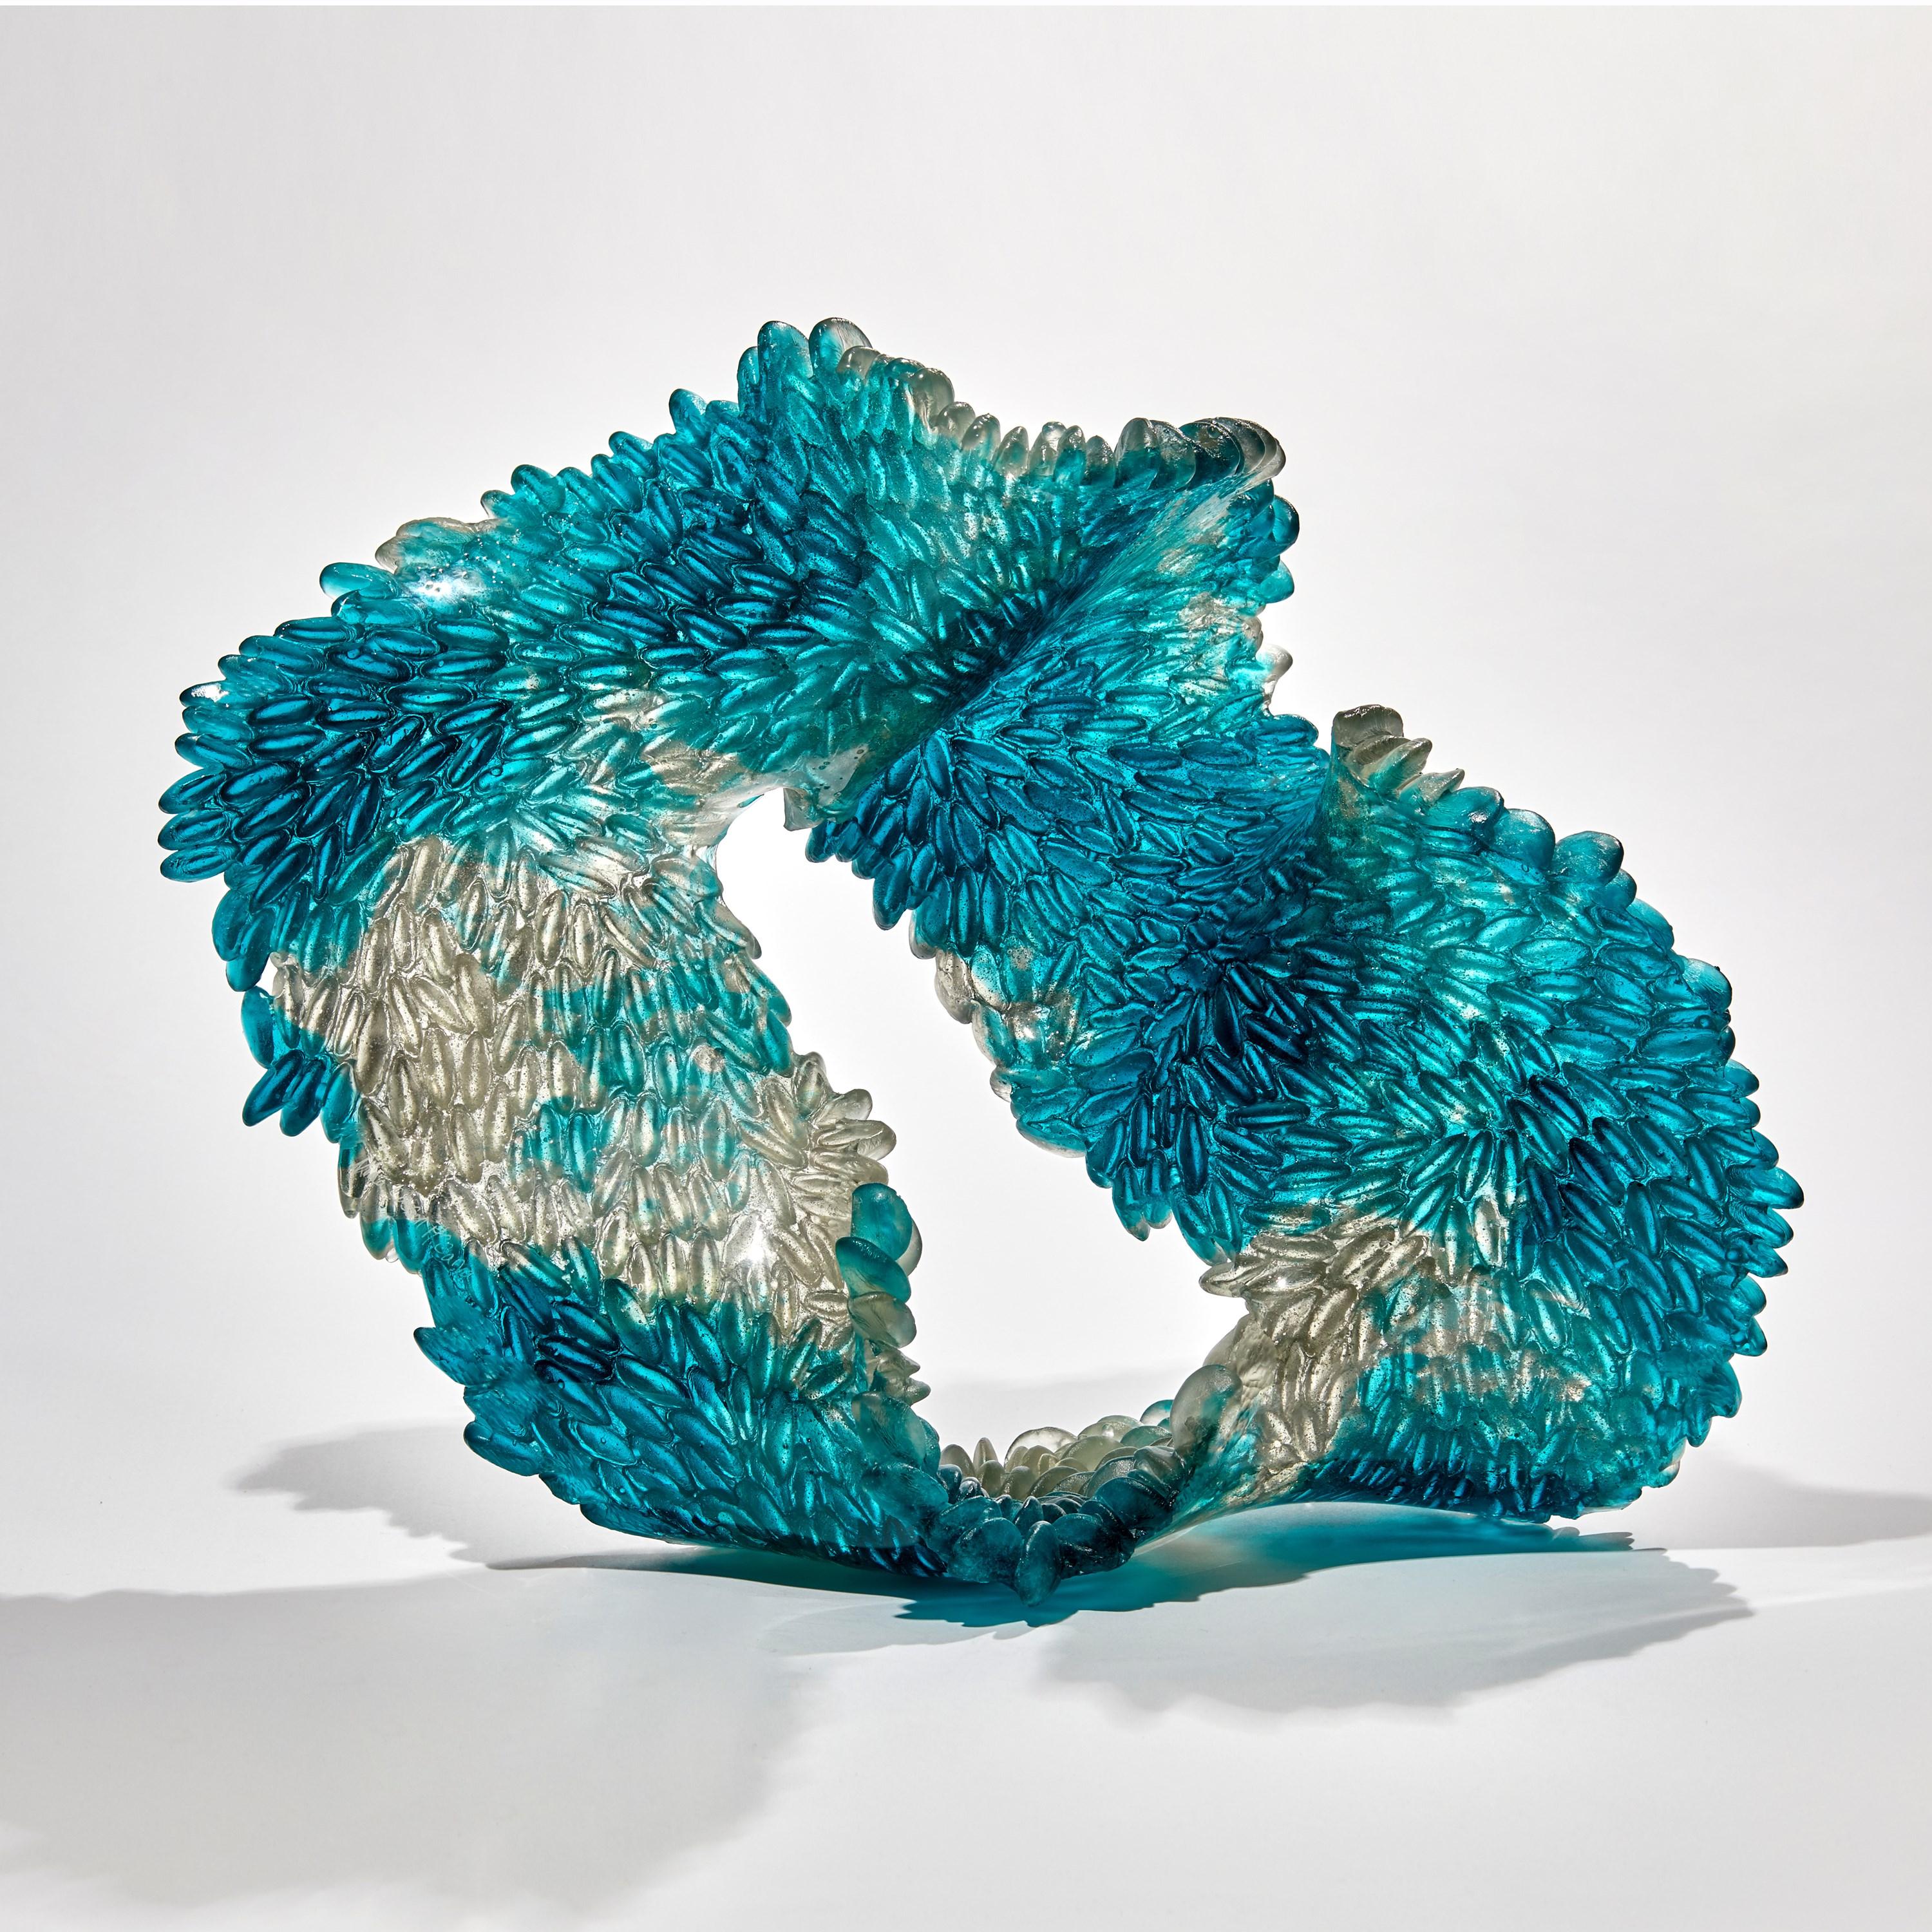 British  Blue Stain, Unique Glass Sculpture in Teal Blue & Grey by Nina Casson McGarva